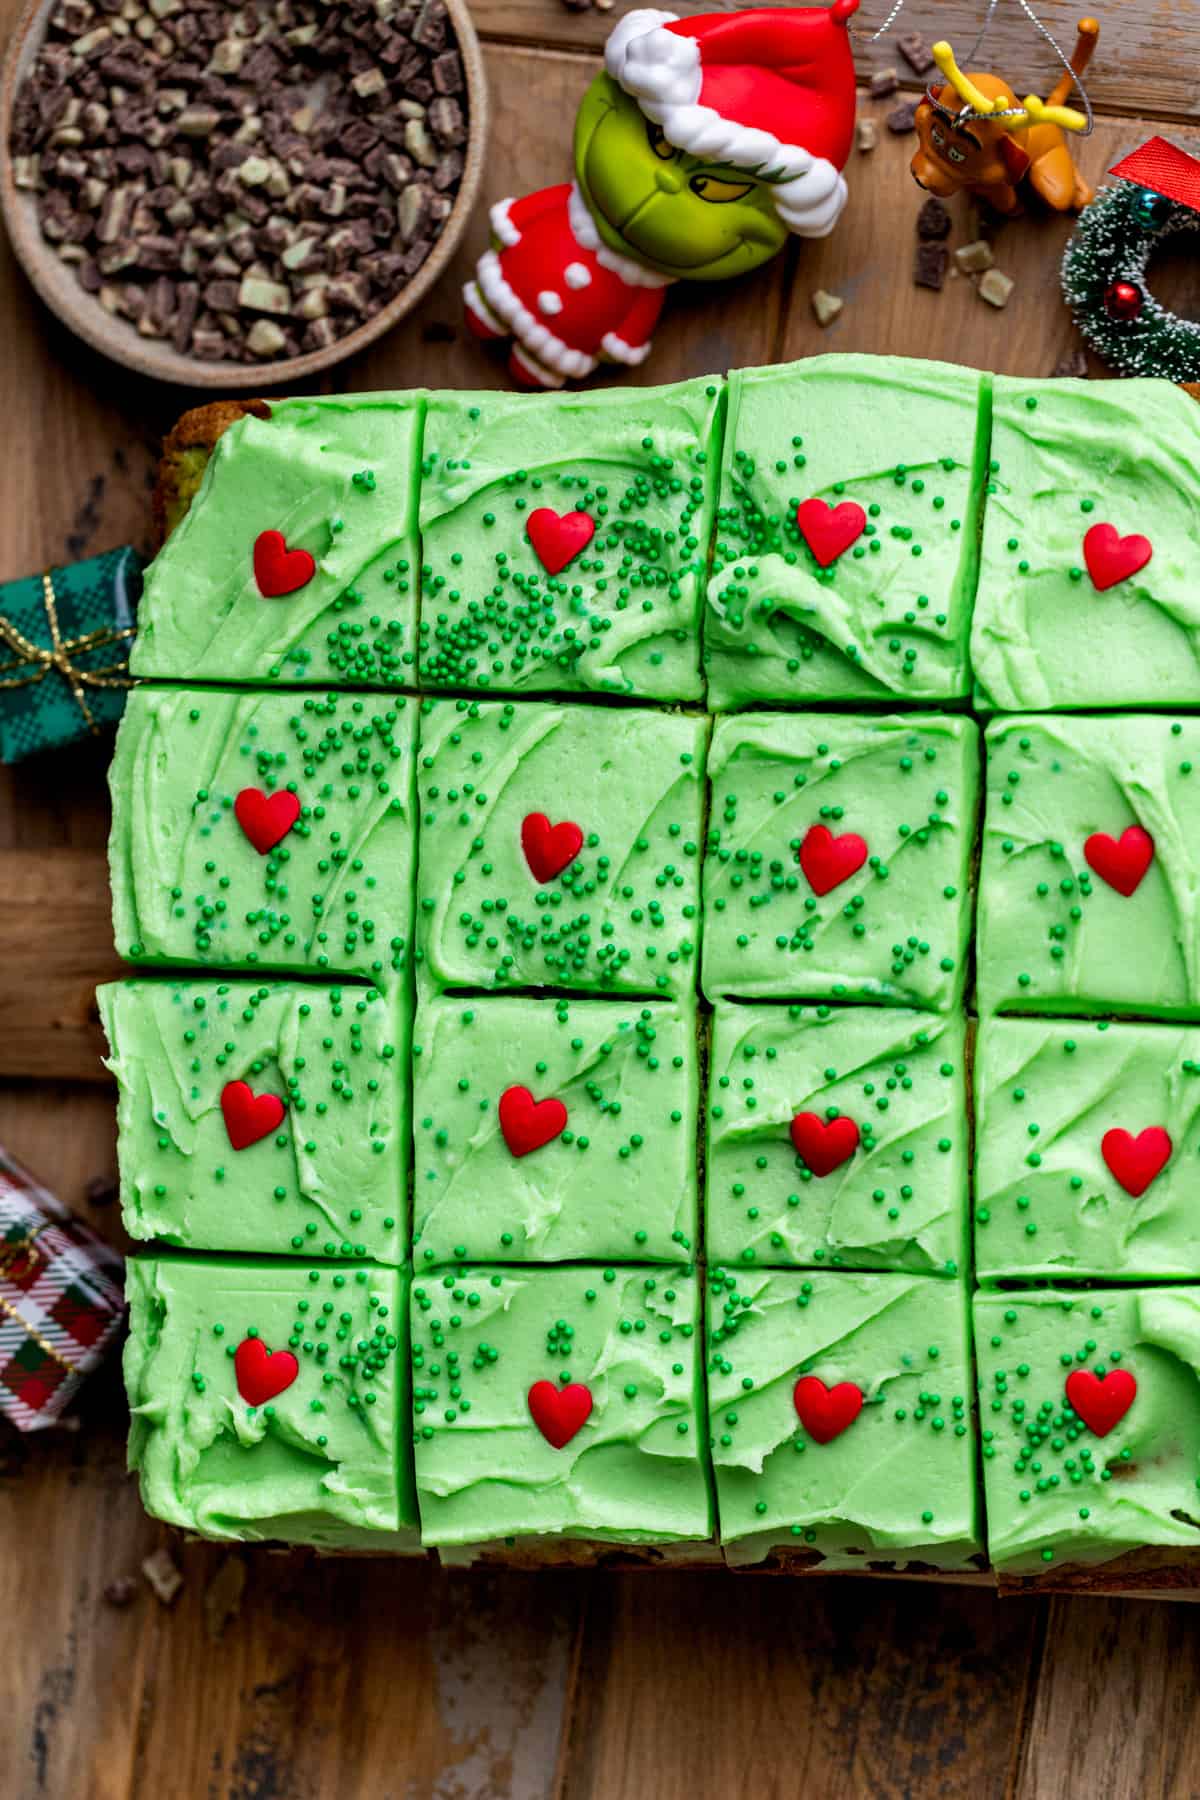 Top view of grinch cake.